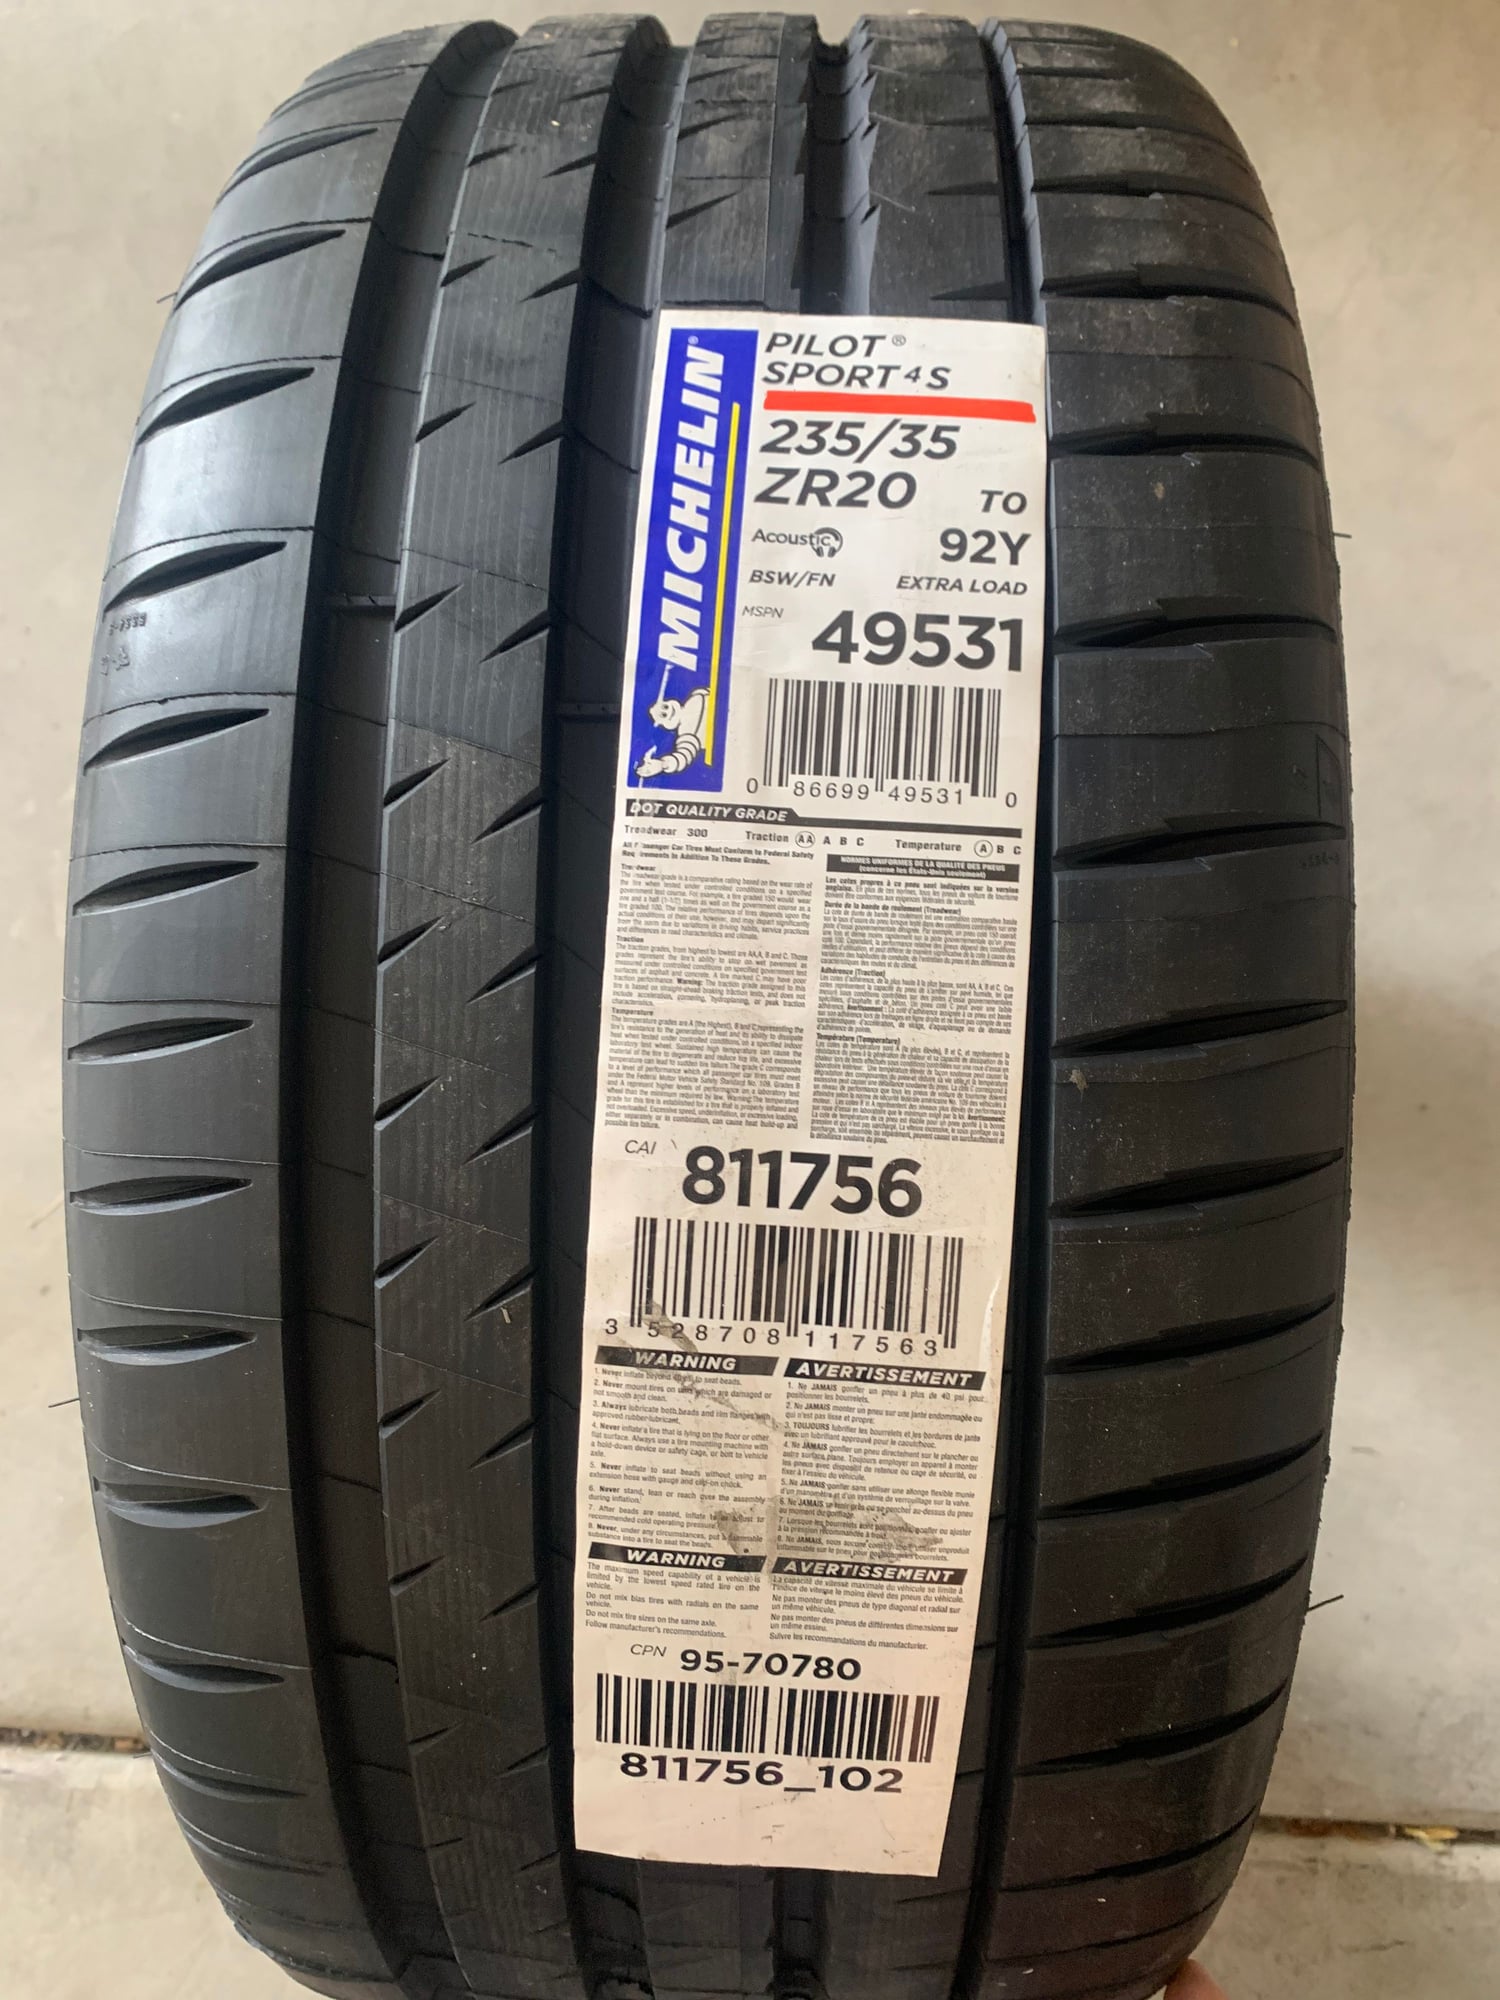 Wheels and Tires/Axles - Brand New Michelin PS4s 235/35/20 - New - 0  All Models - Daimond Bar, CA 91765, United States